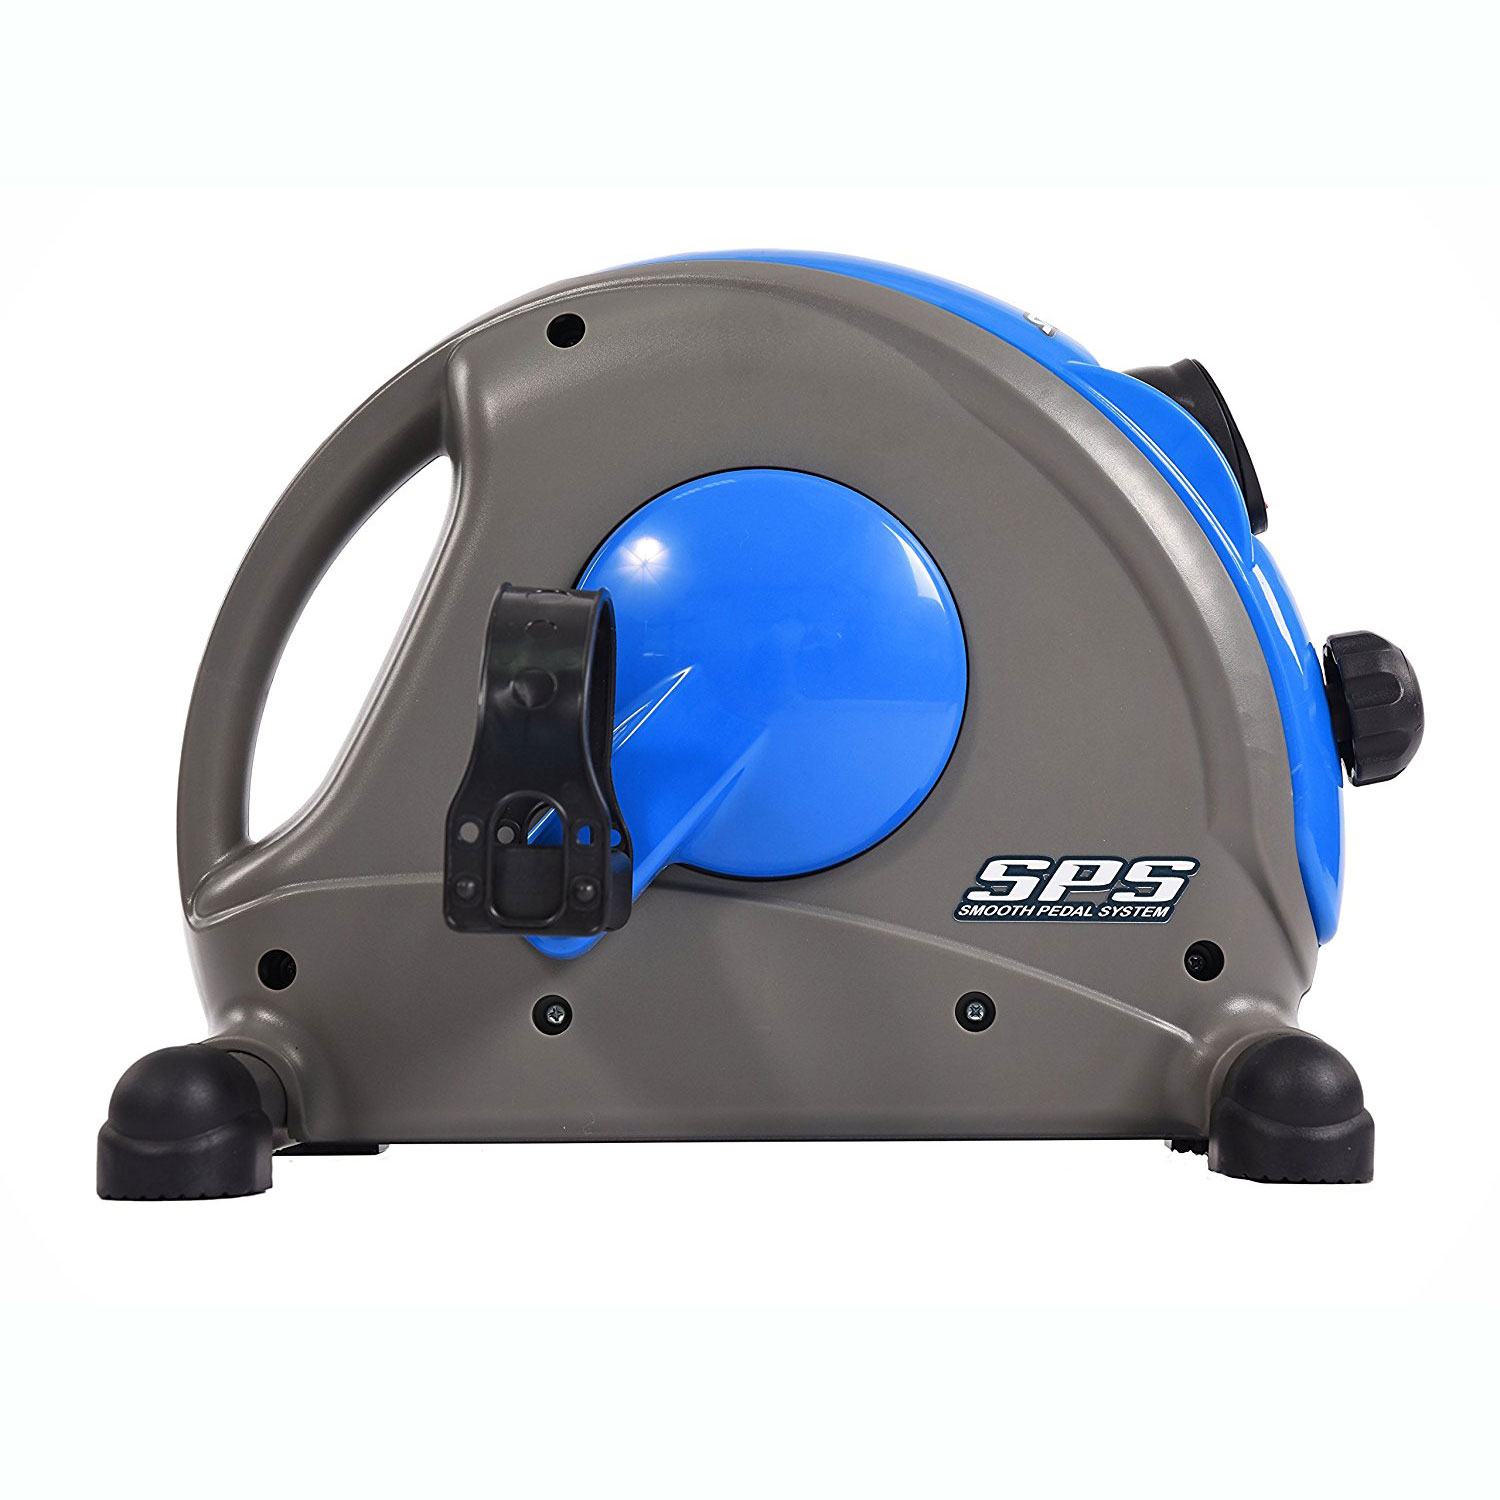 Stamina Mini Trainer Bike with Smooth Pedal System, Blue - image 3 of 9